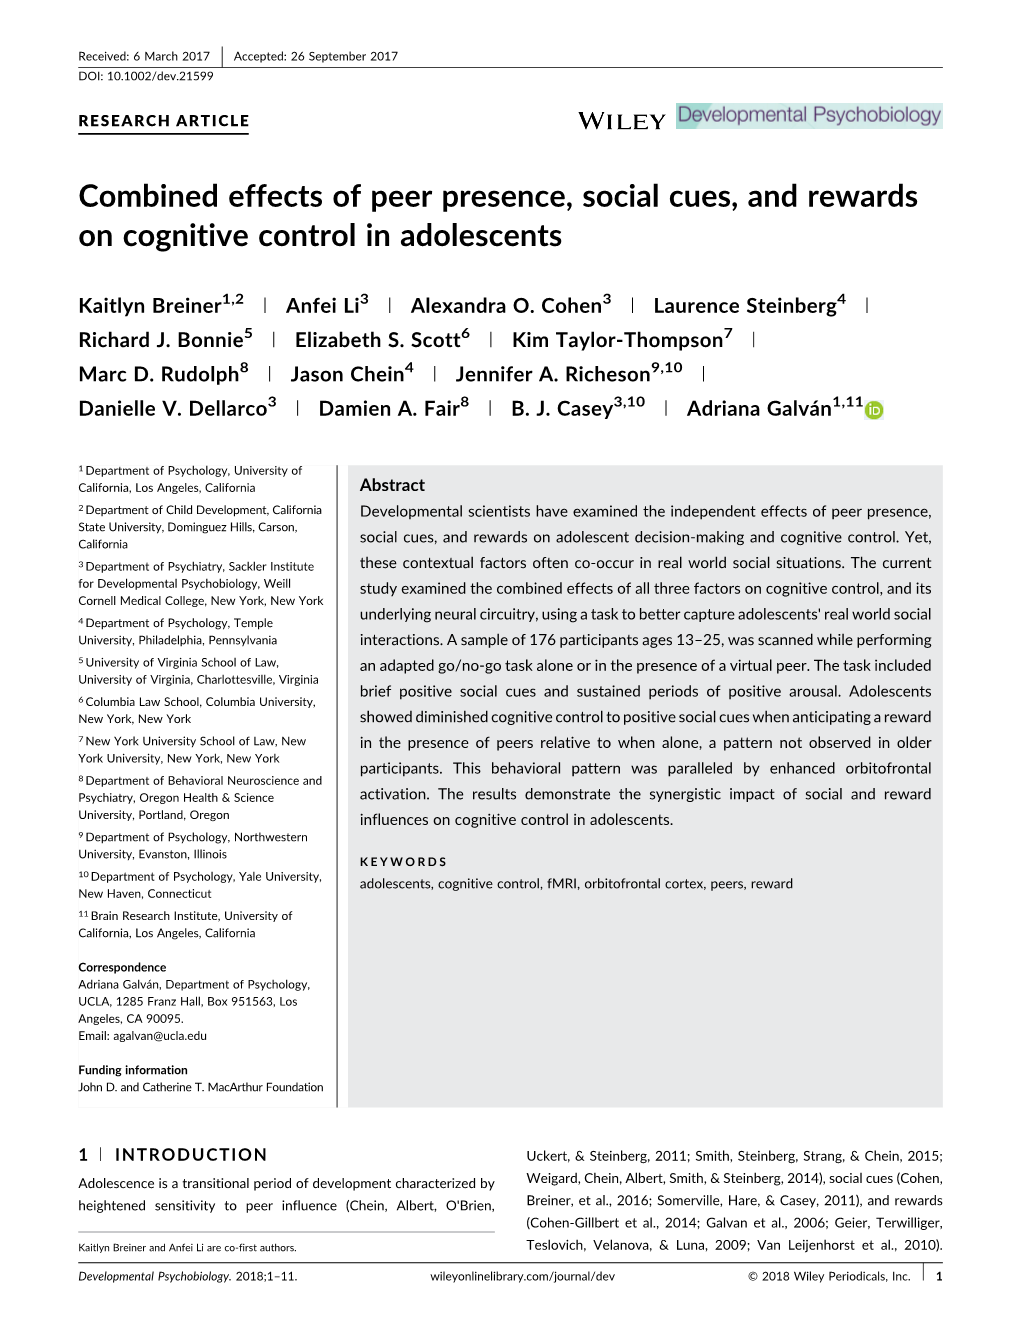 Combined Effects of Peer Presence, Social Cues, and Rewards on Cognitive Control in Adolescents